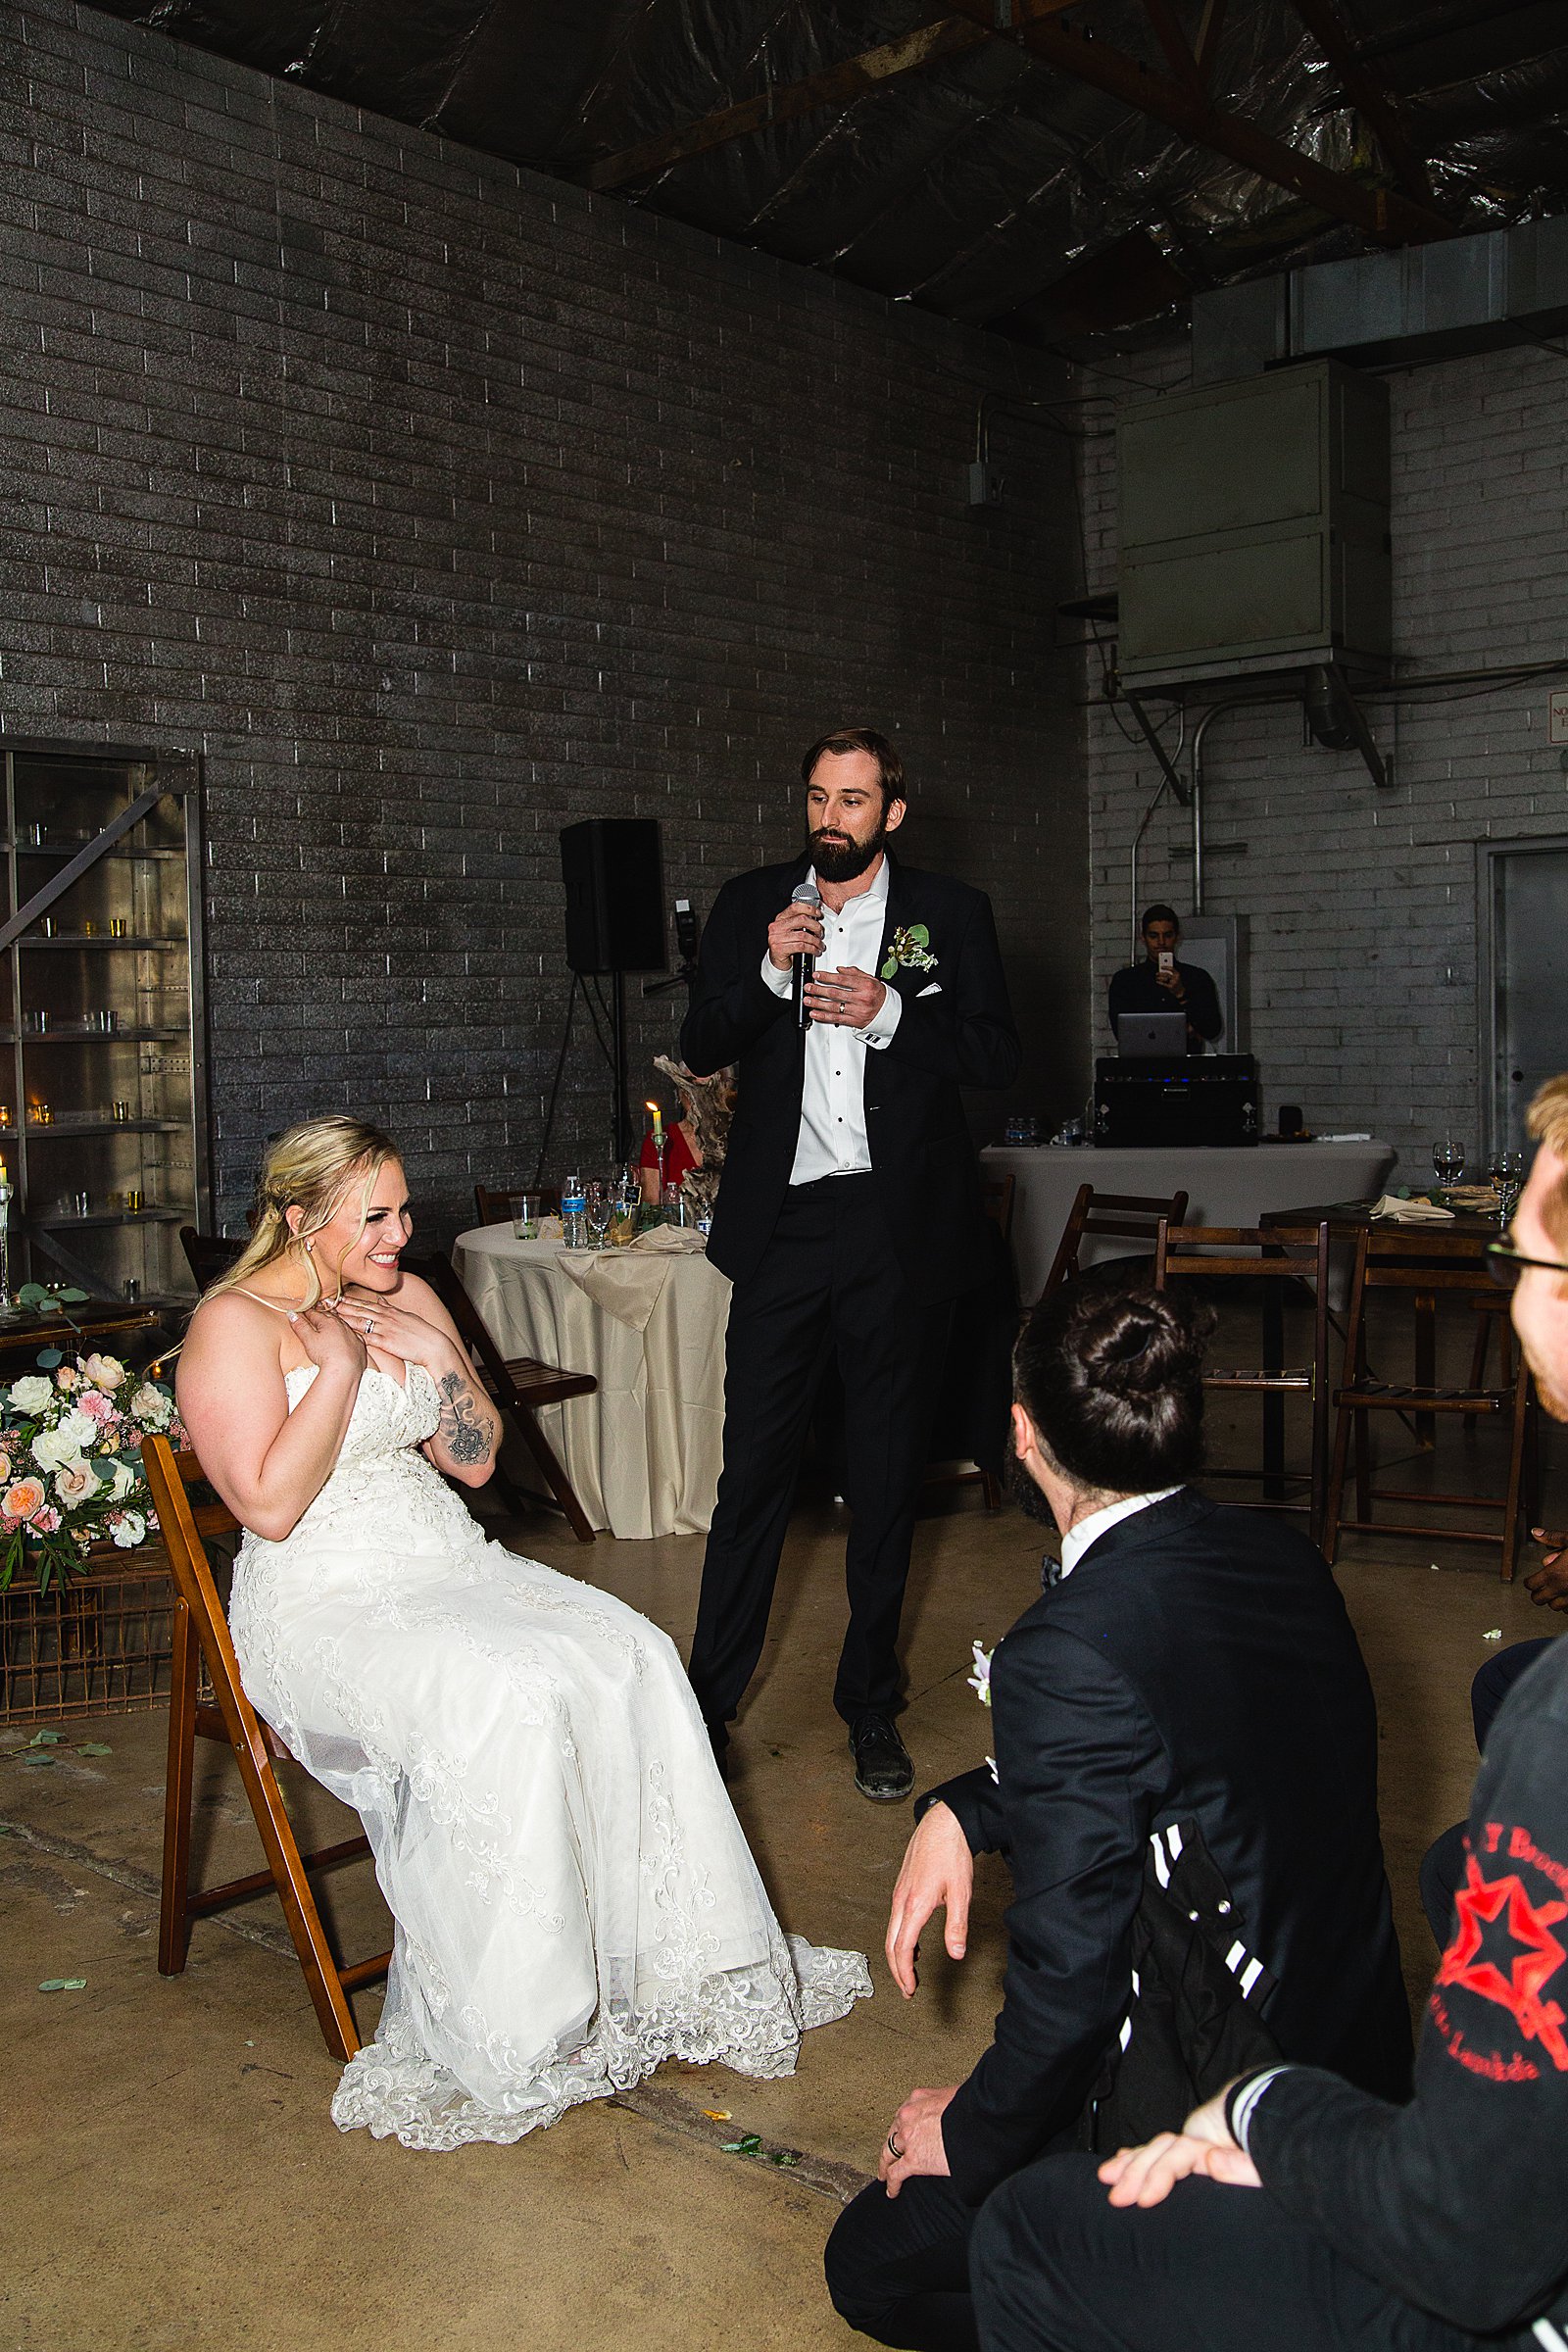 Lavalier ceremony at a wedding reception at The Ice House by Phoenix wedding photographer PMA Photography.